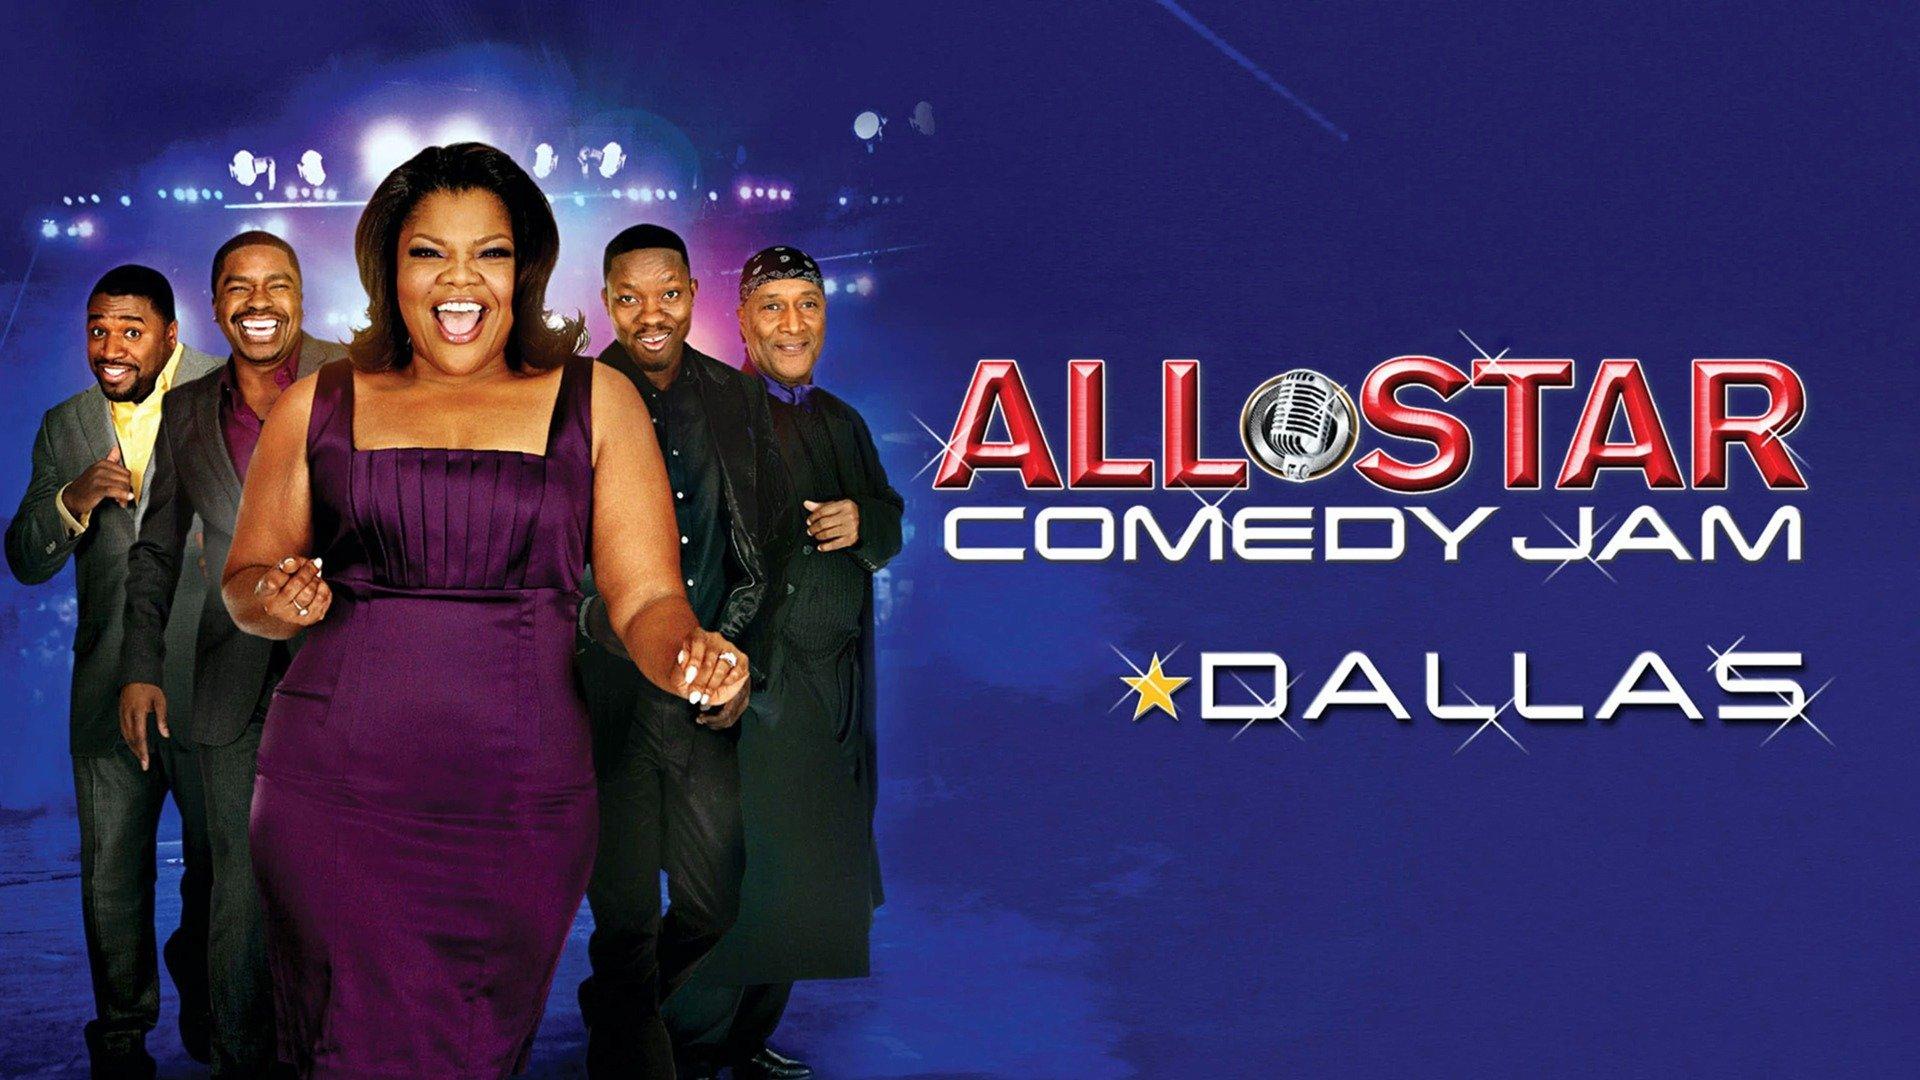 Watch AllStar Comedy Jam Dallas Streaming Online on Philo (Free Trial)